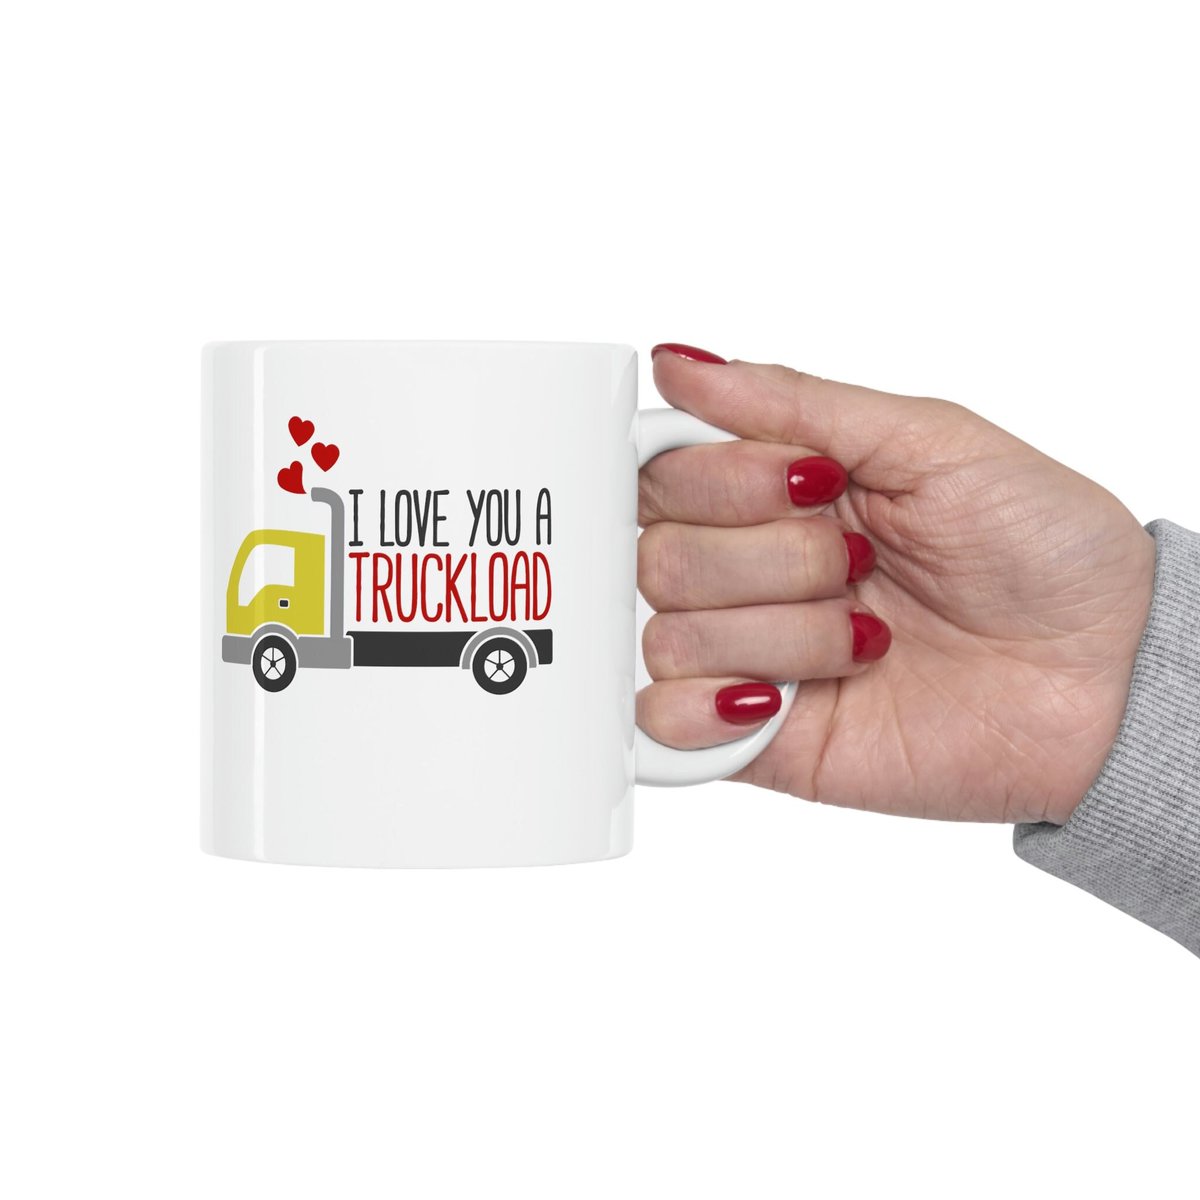 Excited to share the latest addition to my #etsy shop: Love you A Truck Load, I Love You Gift, Cute Valentine Anniversary Coffee Mug, etsy.me/3p38E6j #valentinesday #yes #ceramic #coffeemug #valentinedaygifts #iloveyoumug #iloveyougift #cutemug #ceramicmug